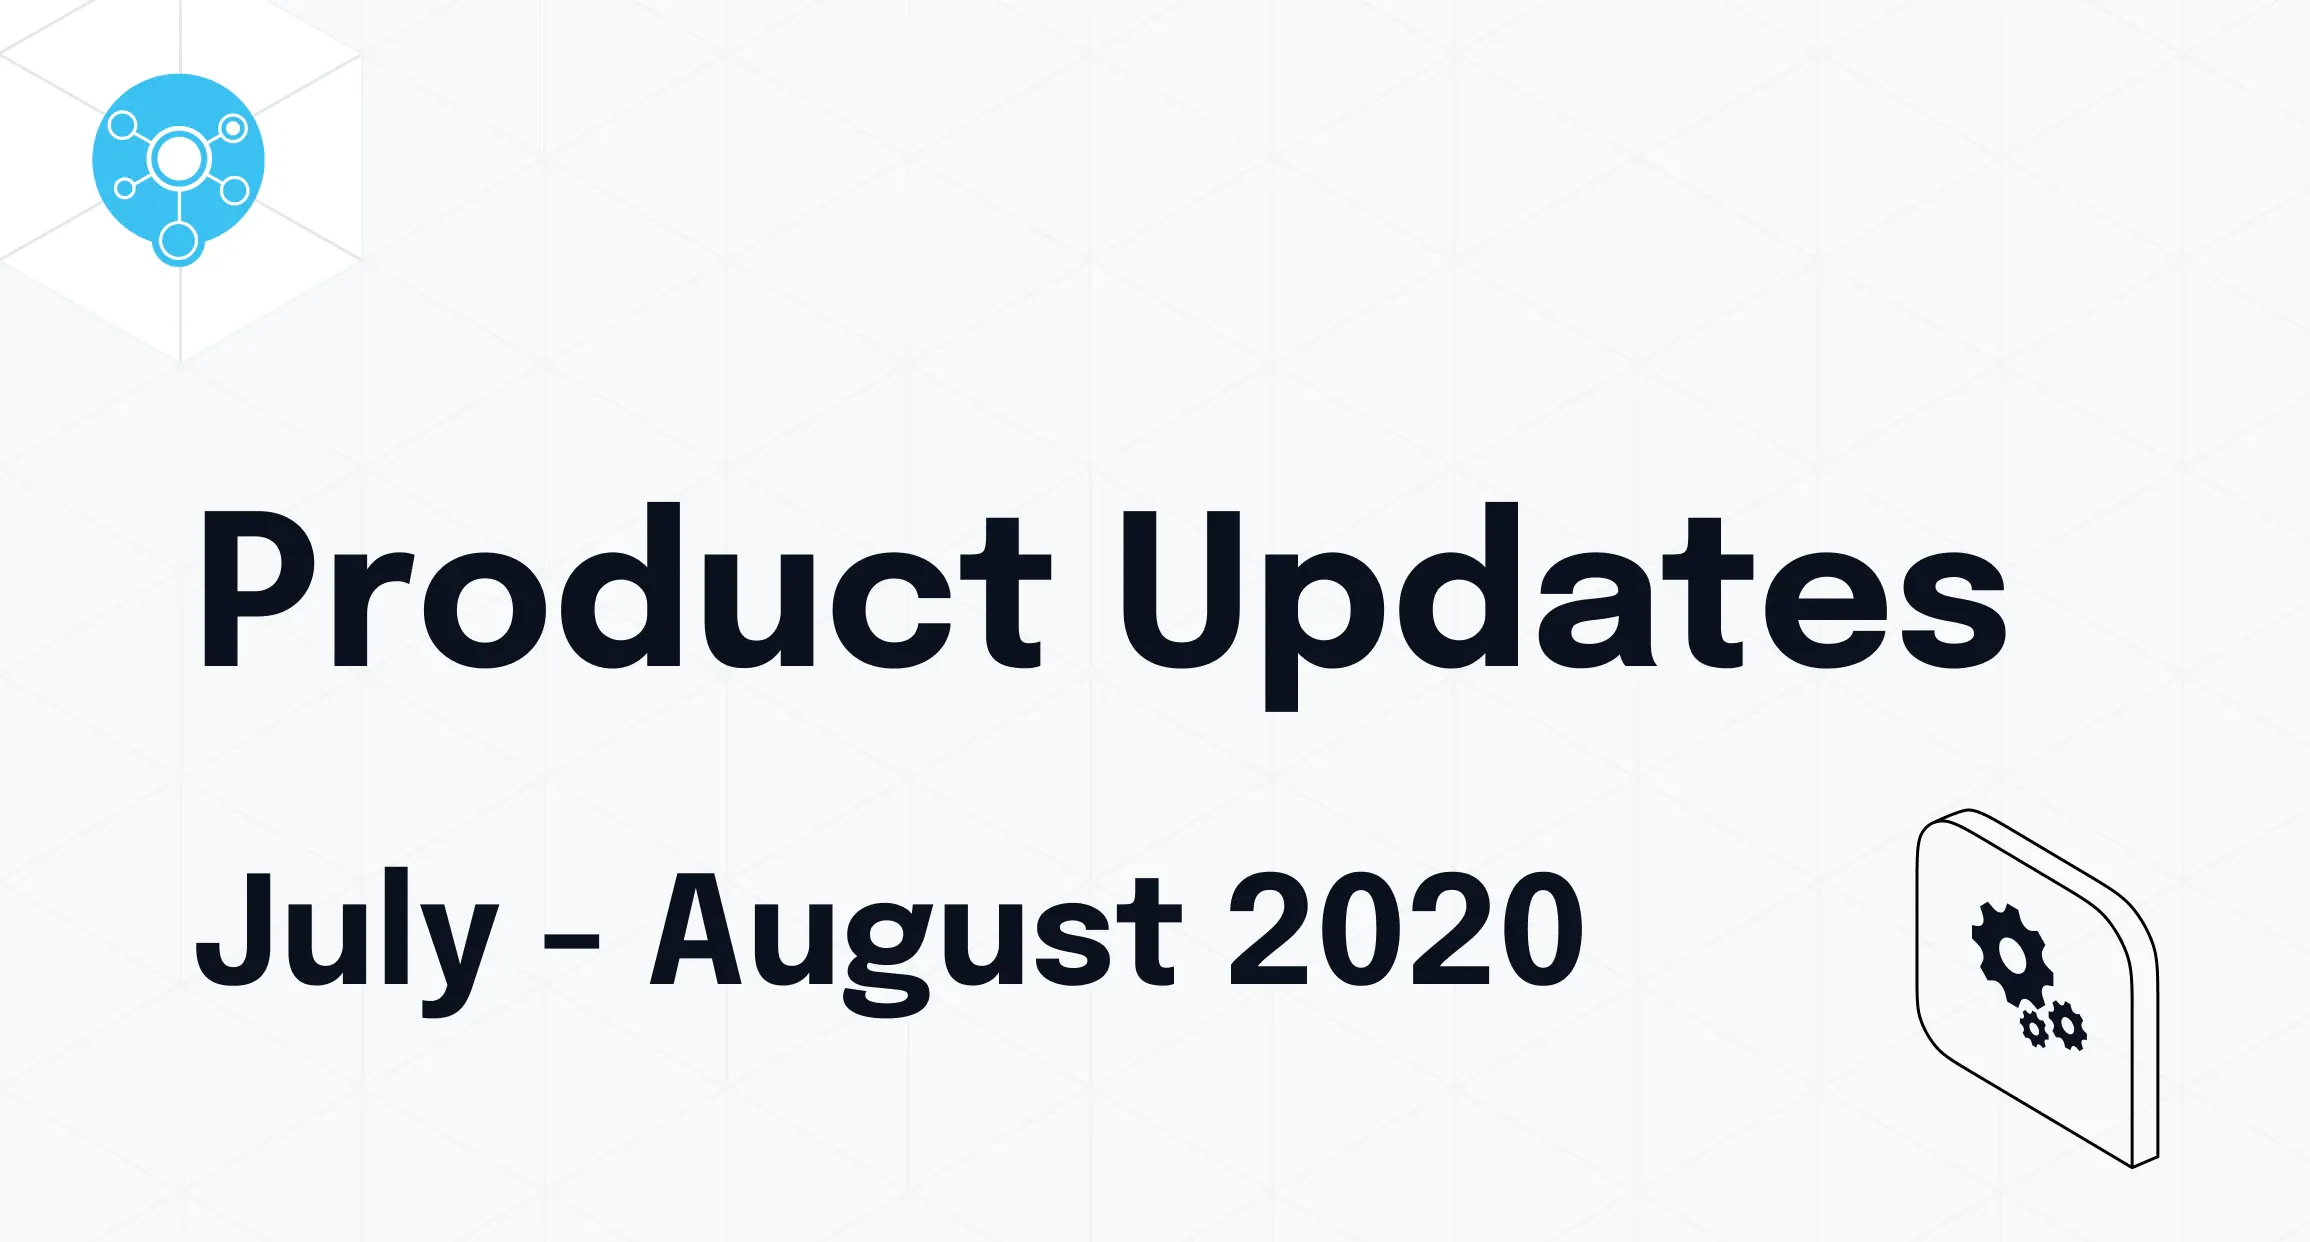 Product updates and changes |July - August 2020